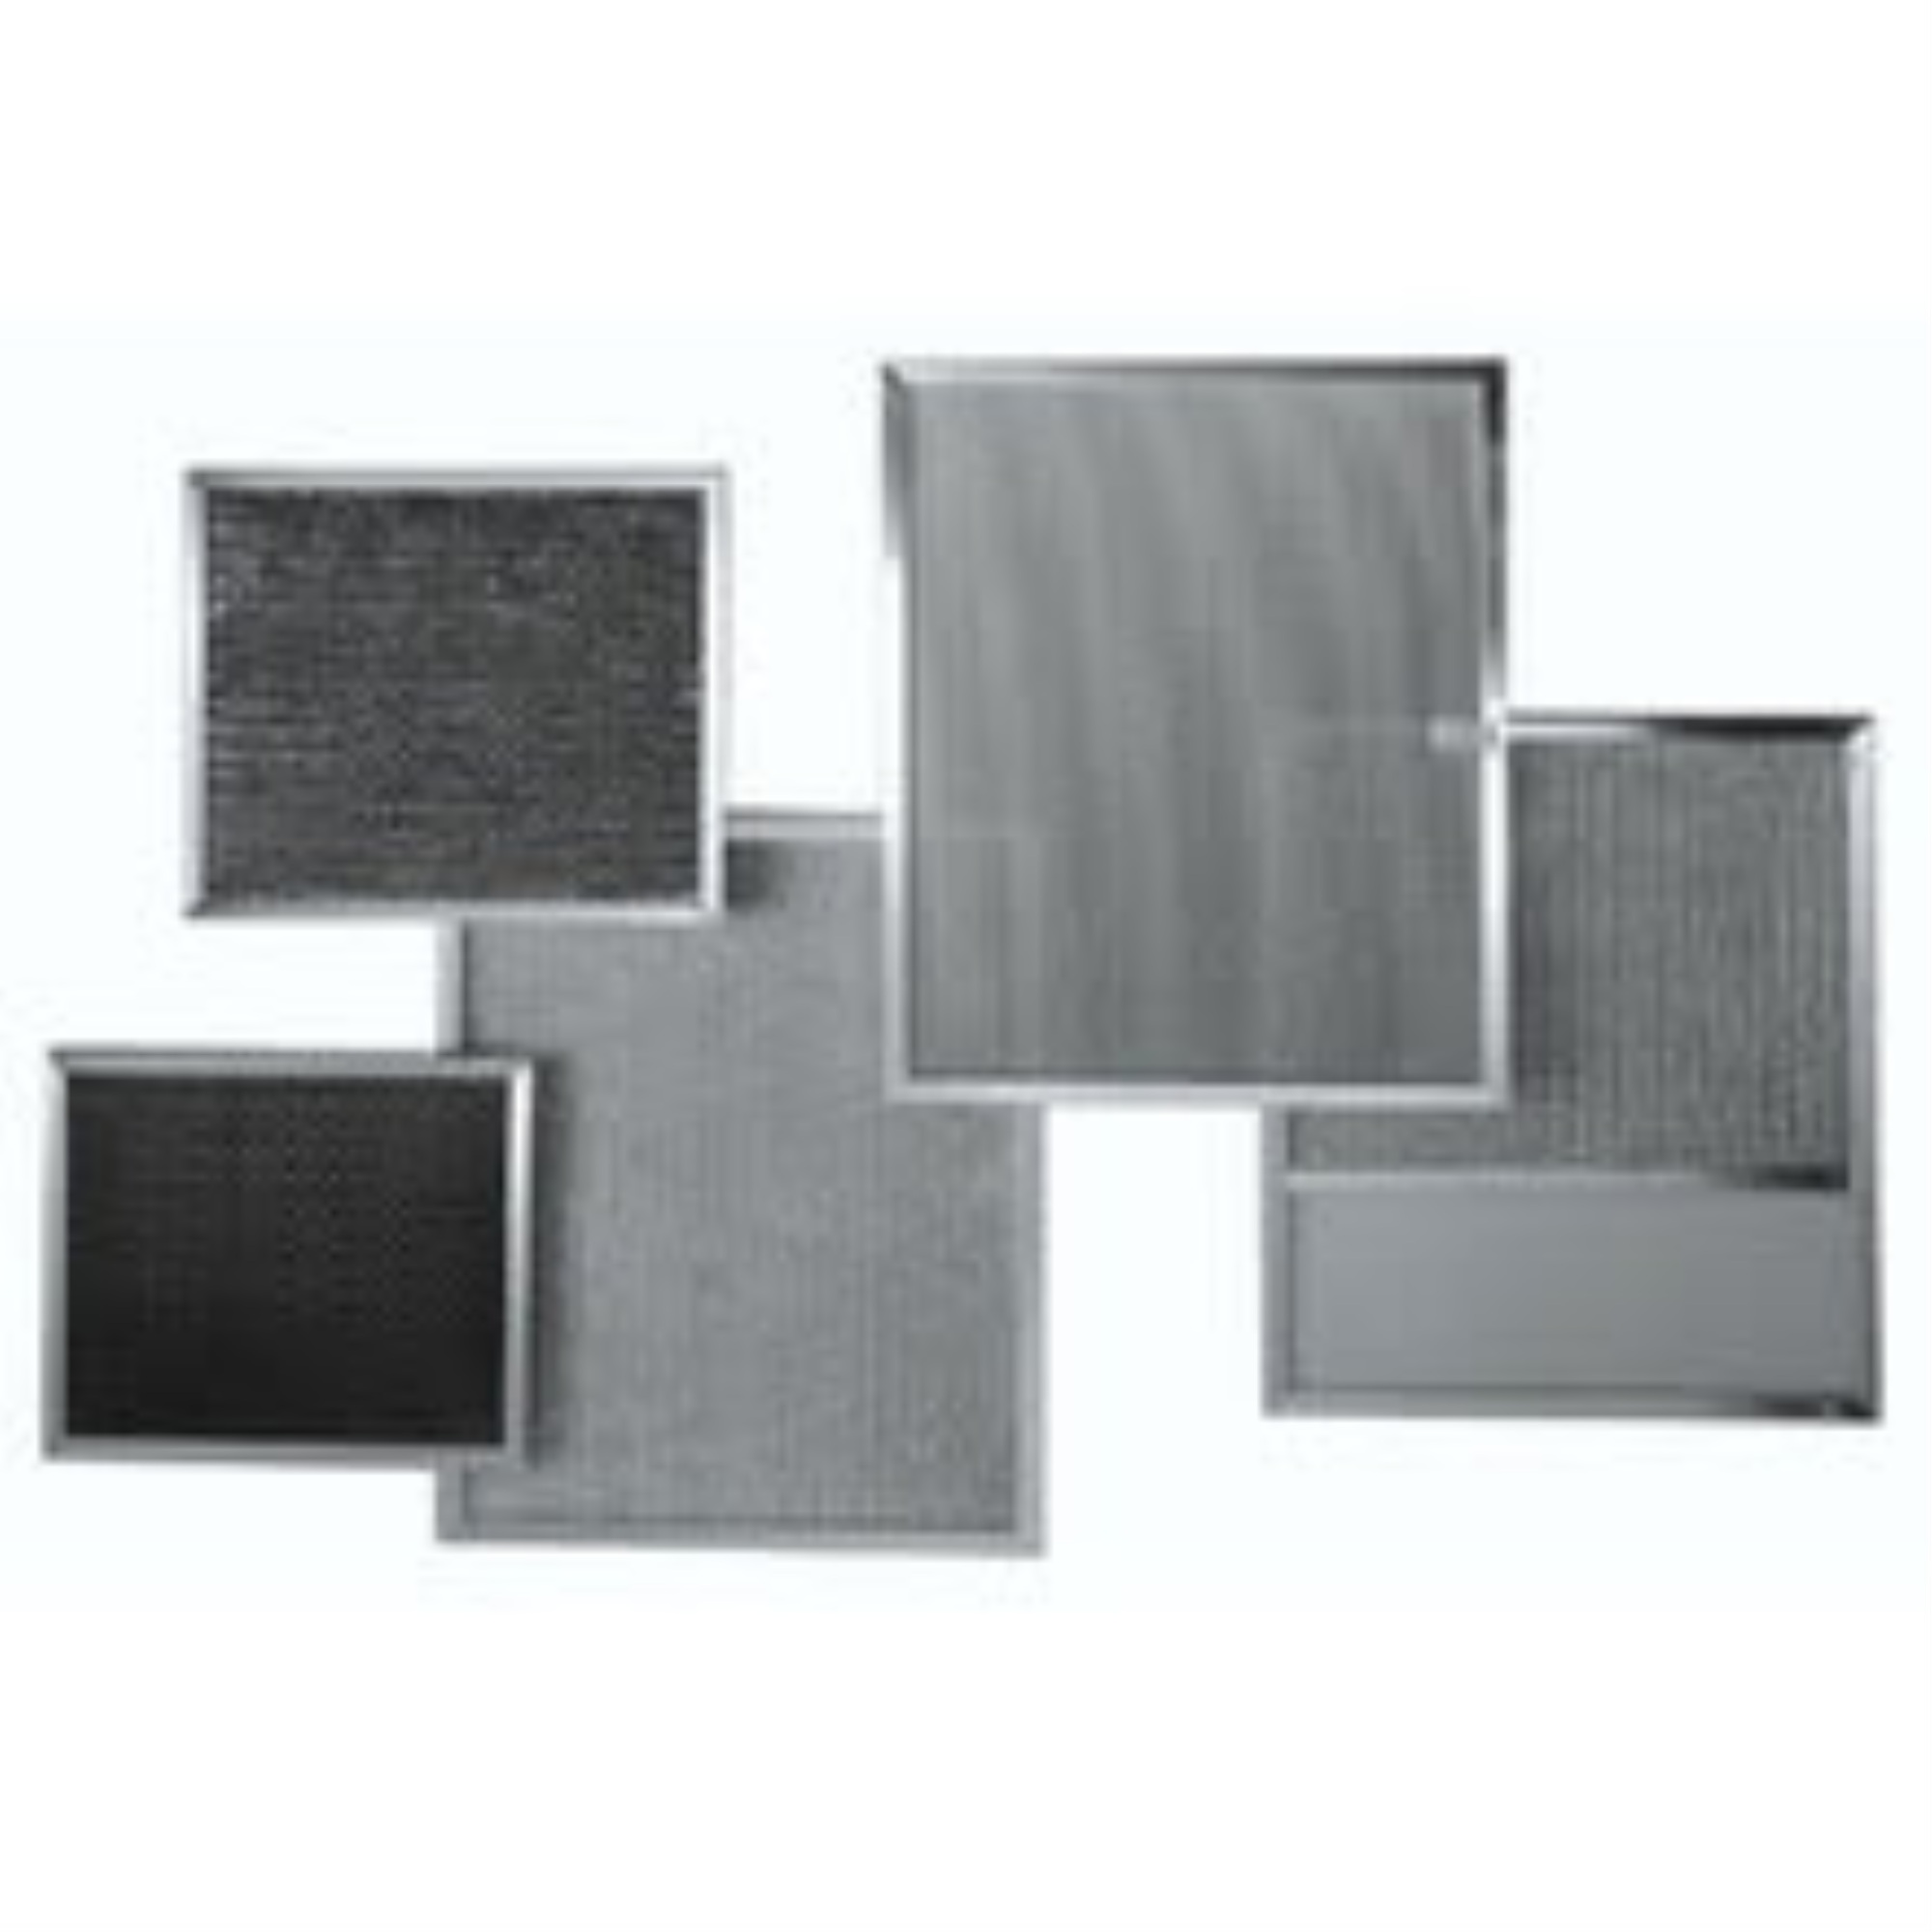 Broan Nutone 11-3/8" X 11-3/4" Washable Aluminum And Charcoal Filter With Light Lens. Master Pack Contains 8 Filters. (Sr610